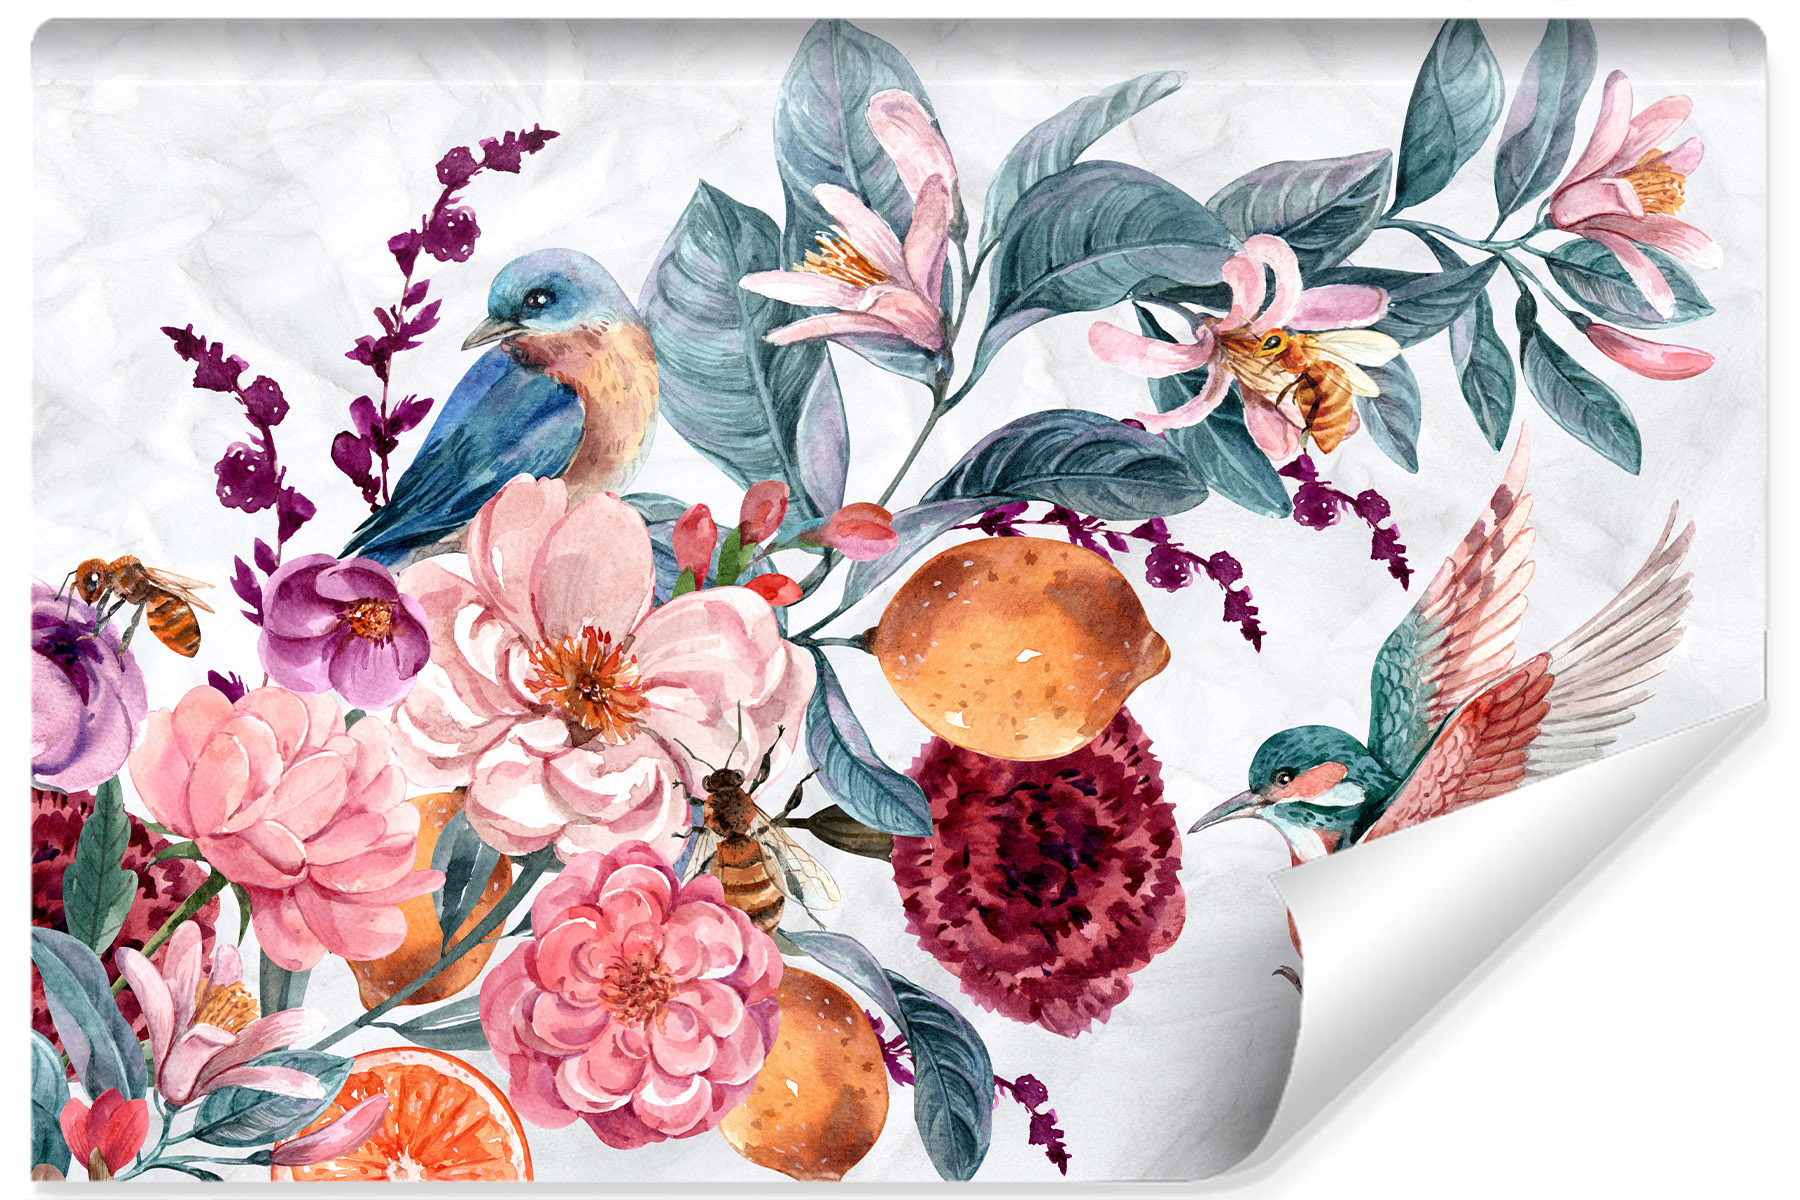 Photo wallpaper Watercolor bird among colorful flowers Non-woven 104 x 70.5 cm FT-3816-VEM